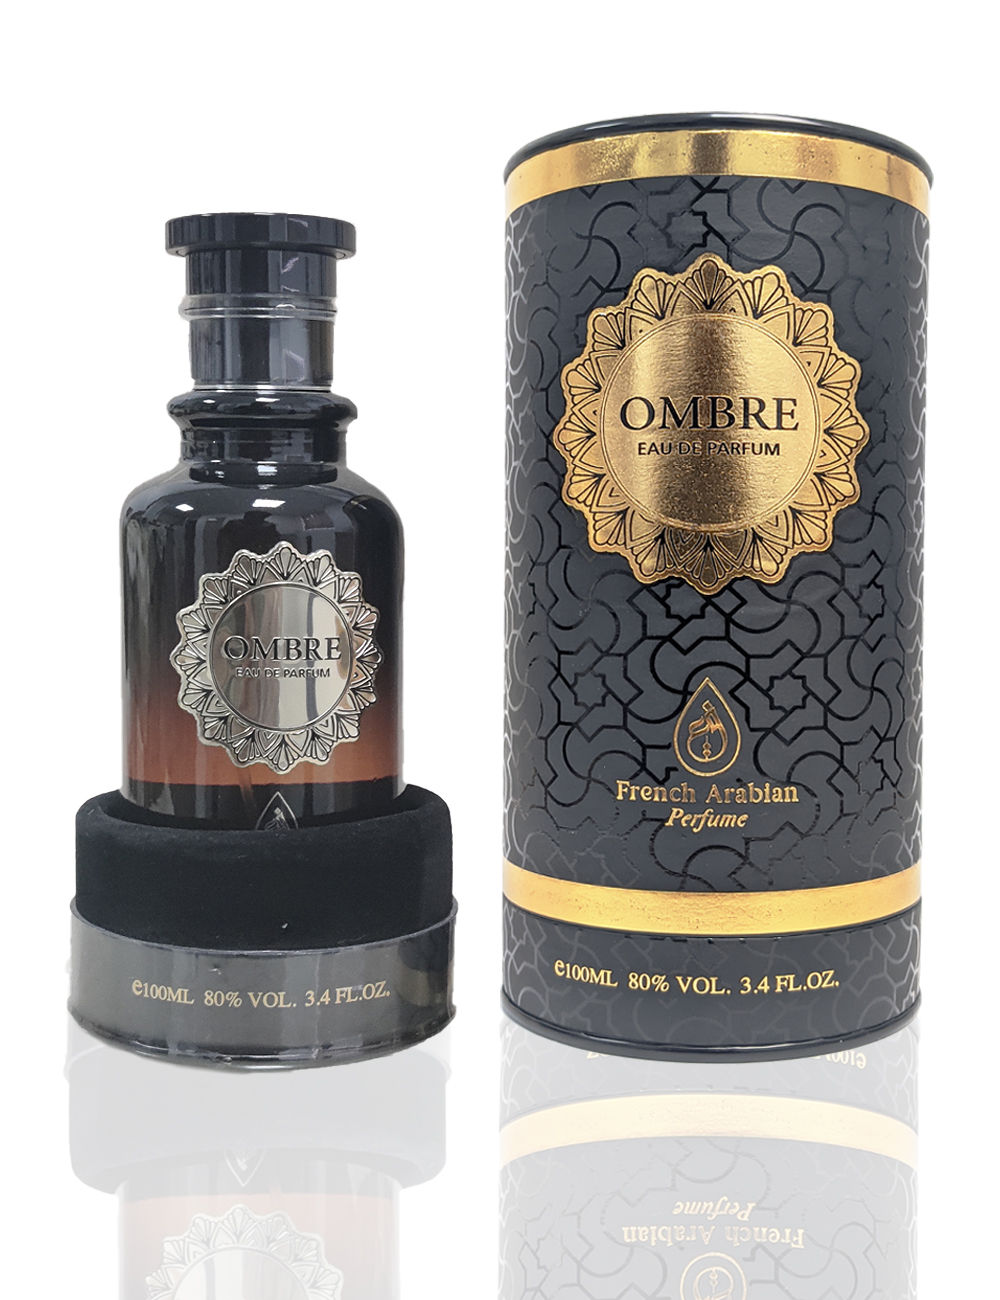 Ombre 100ml by French Arabian Perfumes-Similar to Ombre Nomade, Fragrances